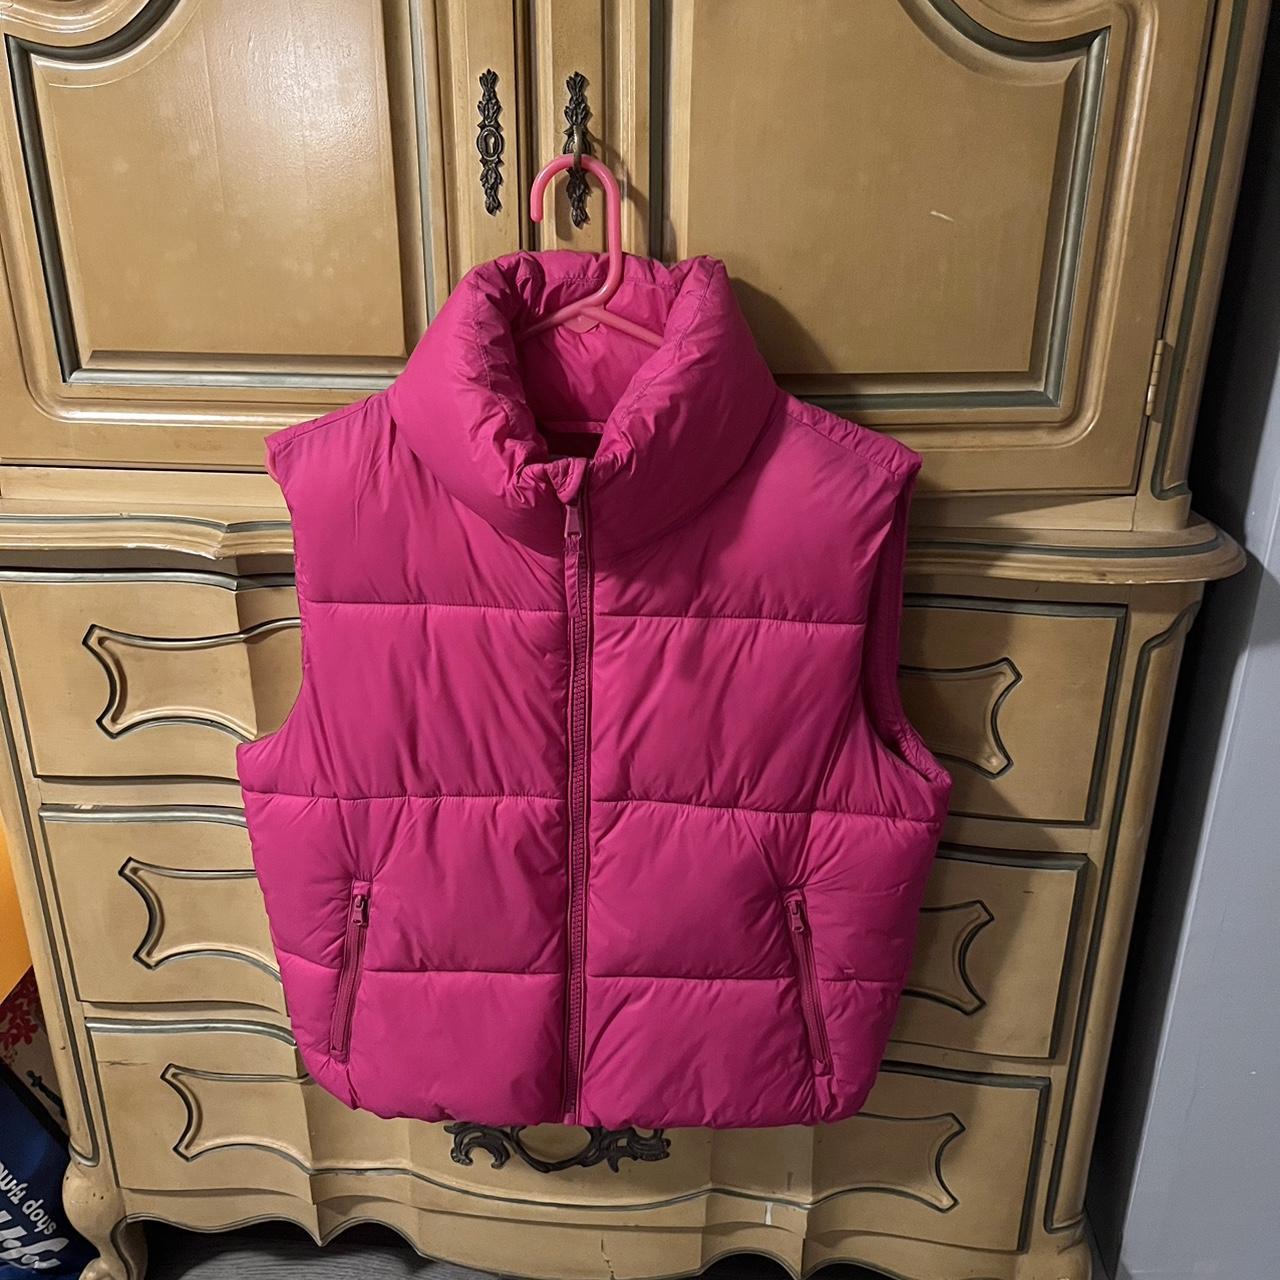 Hot Pink Puffer Vest!! - perfect for winter - only... - Depop